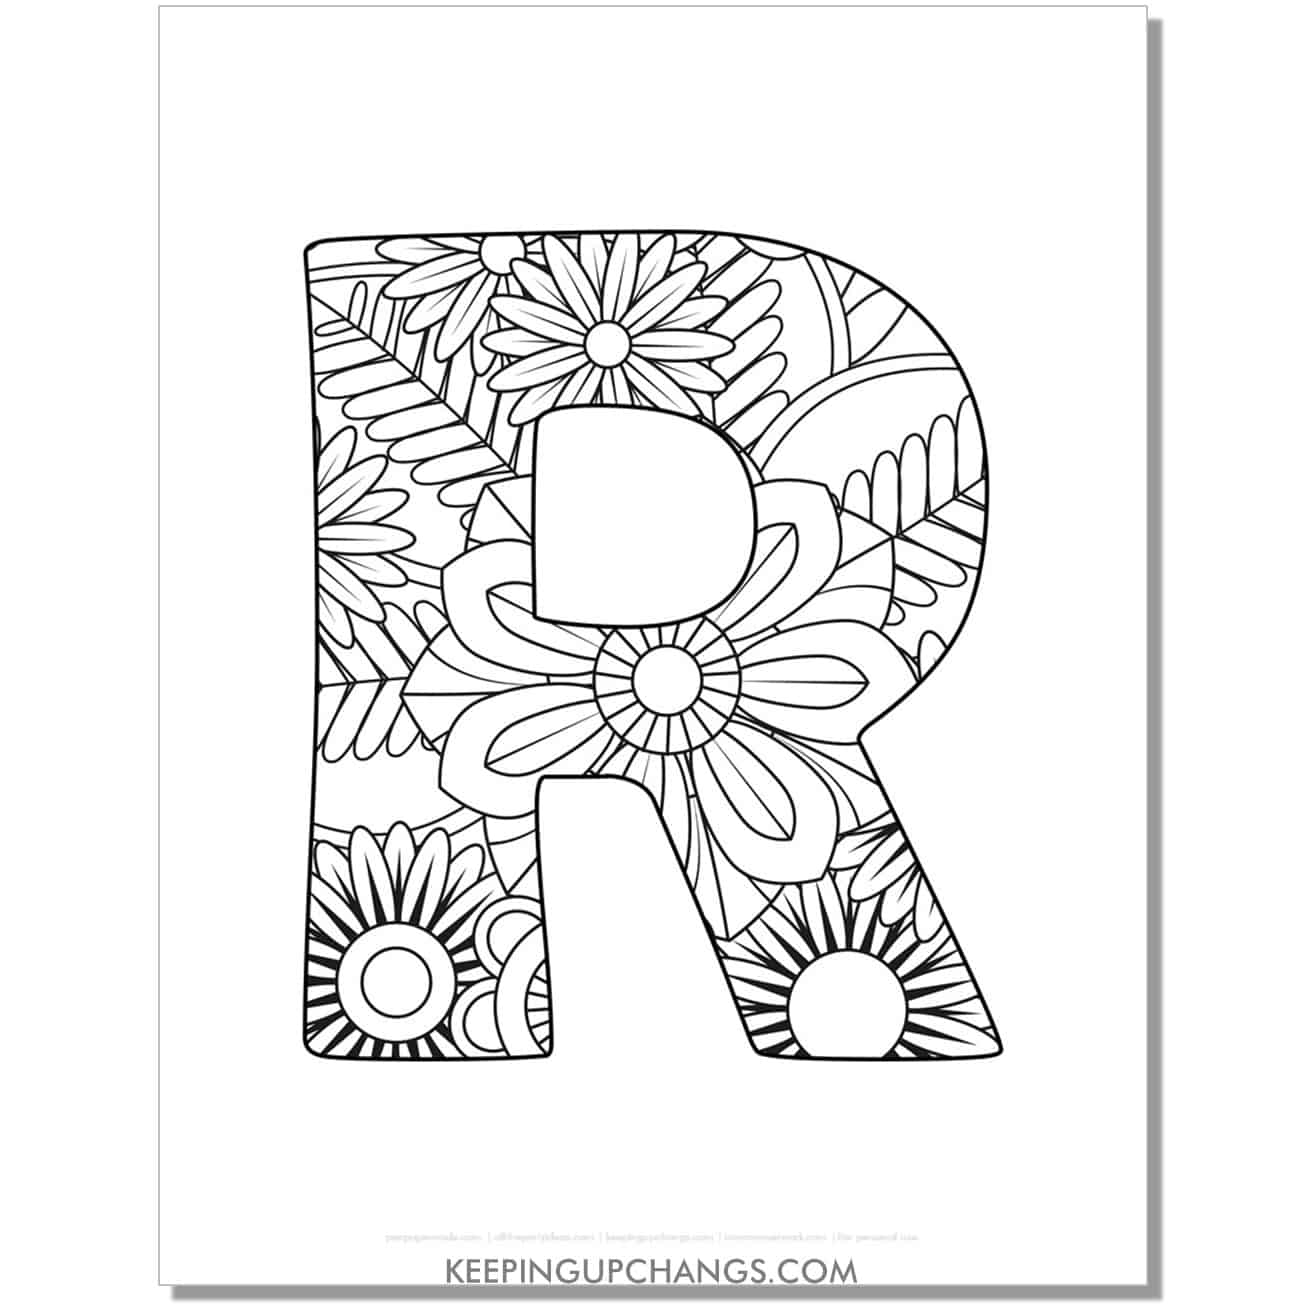 free letter r to color, complex mandala zentangle for adults.